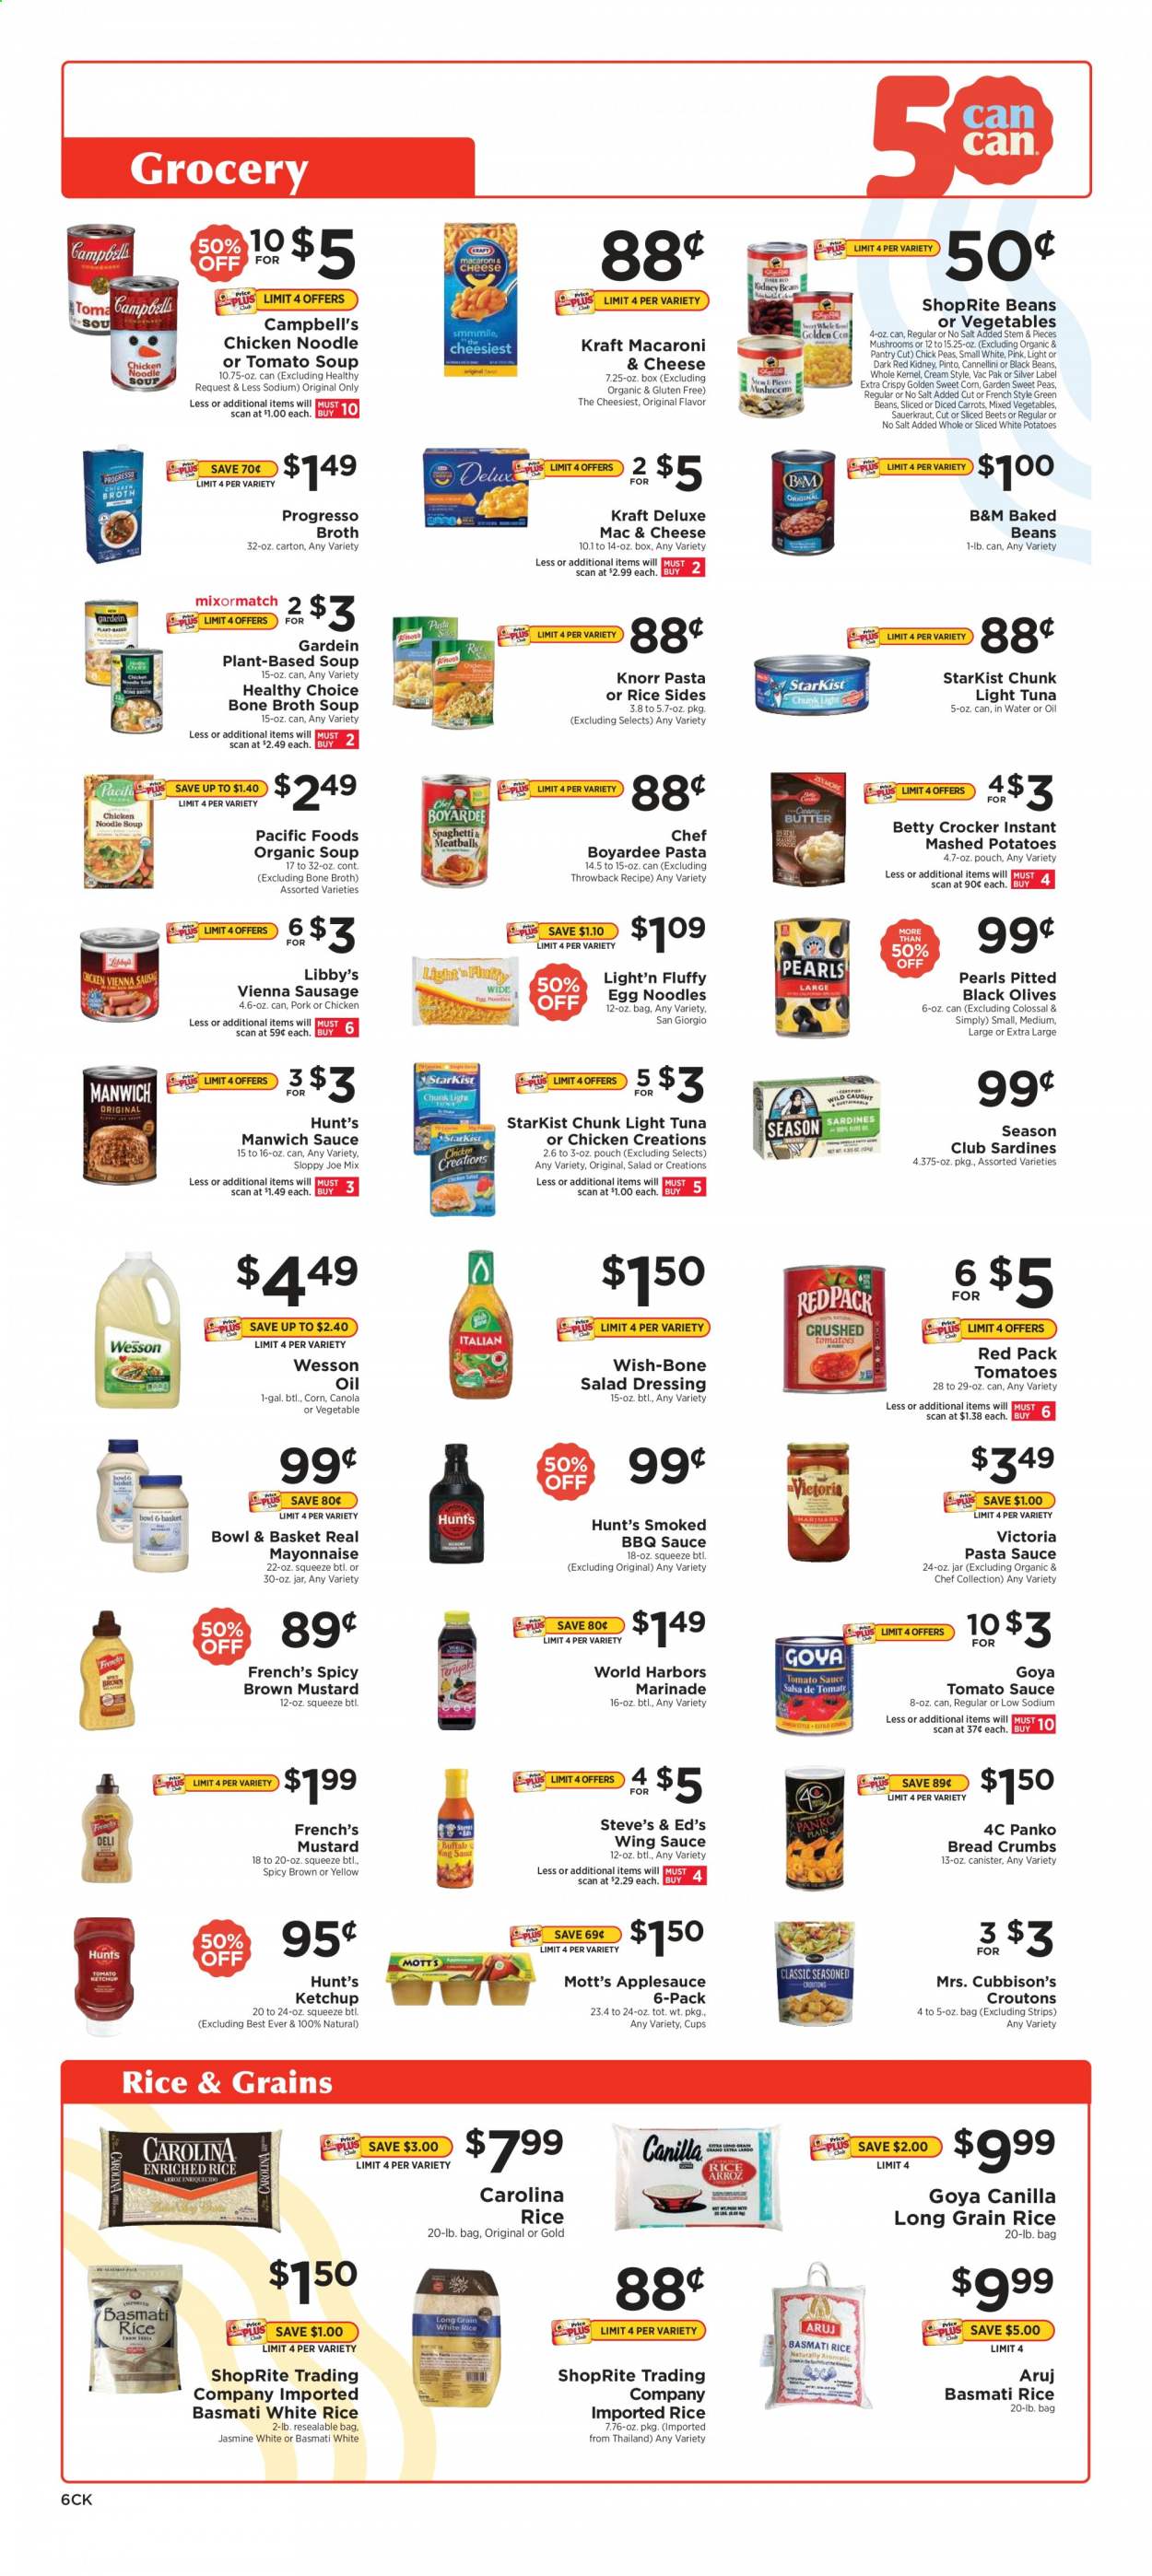 thumbnail - ShopRite Flyer - 01/17/2021 - 01/23/2021 - Sales products - Bowl & Basket, breadcrumbs, panko breadcrumbs, beans, corn, green beans, mixed vegetables, Mott's, sardines, tuna, StarKist, Campbell's, macaroni & cheese, mashed potatoes, tomato soup, pasta sauce, chicken soup, meatballs, soup, Knorr, sauce, noodles cup, noodles, Progresso, Healthy Choice, pasta sides, Kraft®, ready meal, rice sides, vienna sausage, butter, mayonnaise, frozen vegetables, strips, croutons, black beans, canned tuna, sauerkraut, tomato sauce, olives, light tuna, baked beans, Goya, Manwich, Chef Boyardee, pickled cabbage, canned fish, canned meat, basmati rice, chickpeas, egg noodles, white rice, long grain rice, BBQ sauce, mustard, salad dressing, ketchup, dressing, salsa, marinade, wing sauce, apple sauce, canister, Cello. Page 6.